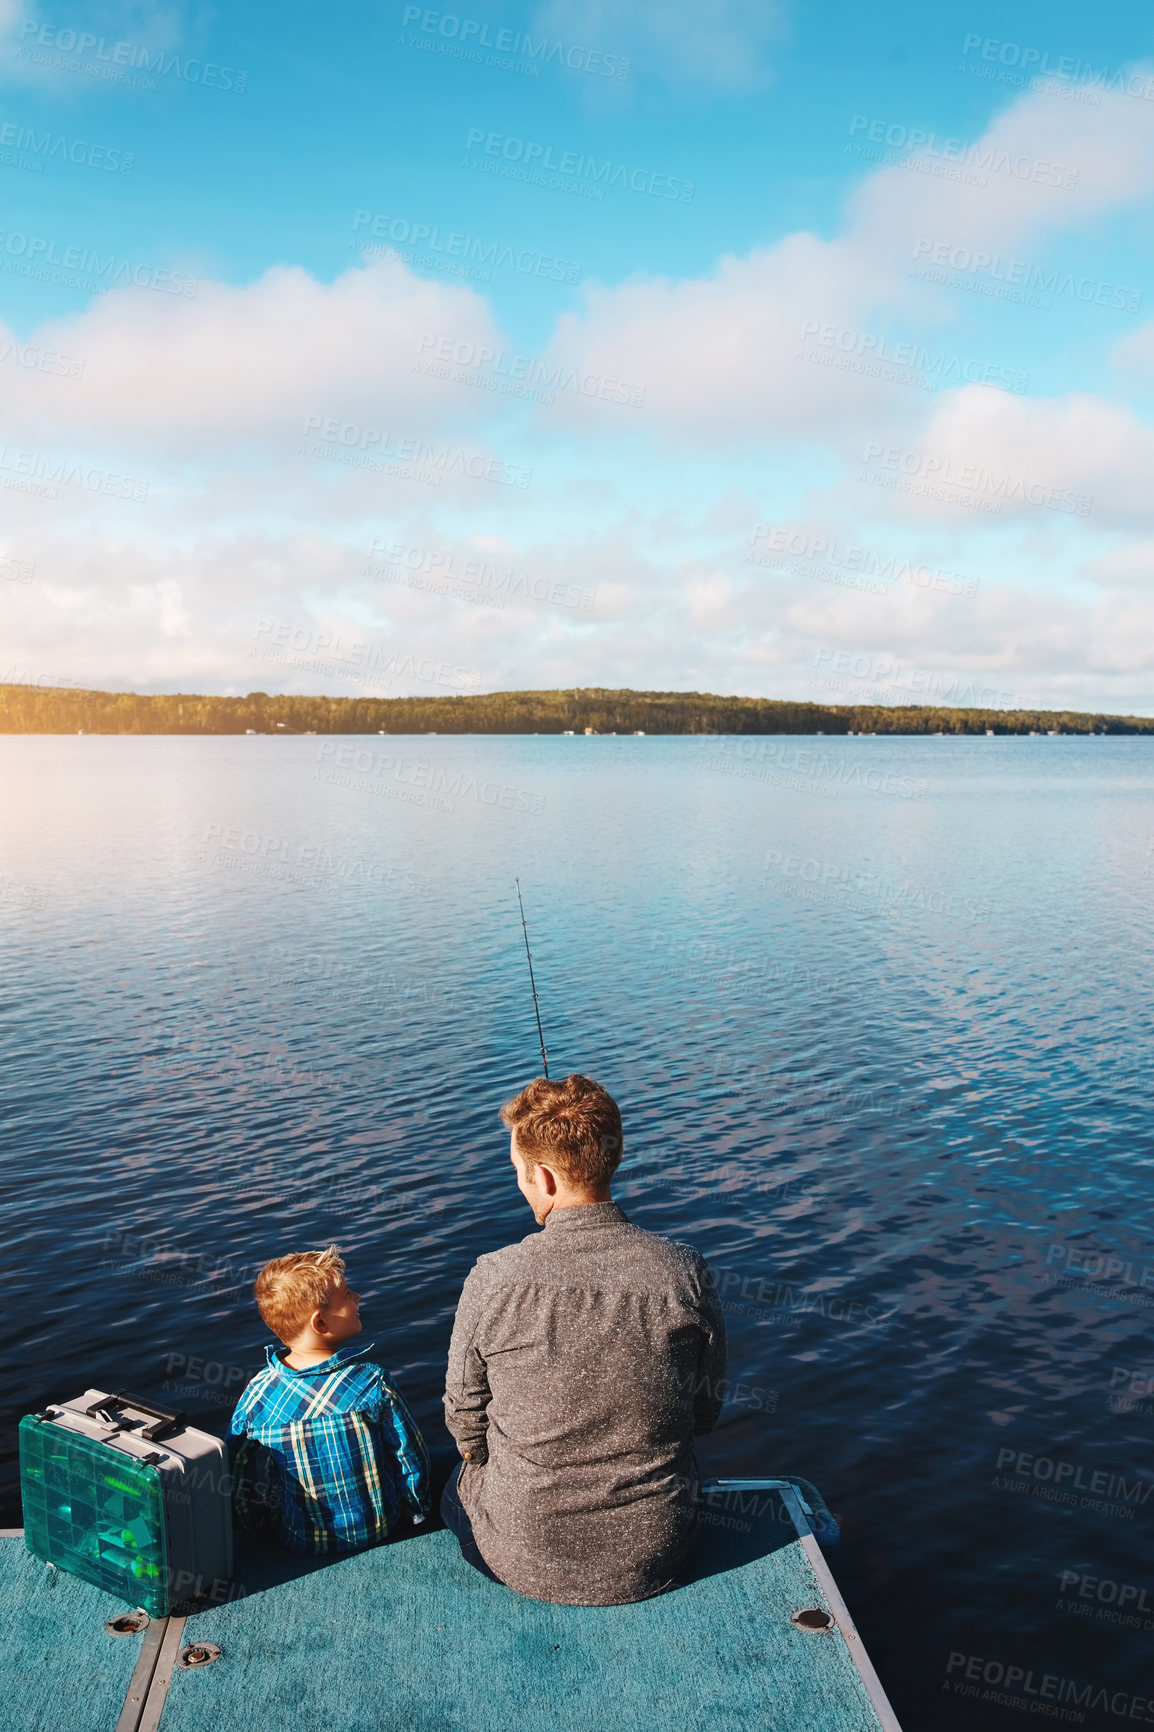 Buy stock photo Shot of a father and his young son out fishing by the lake